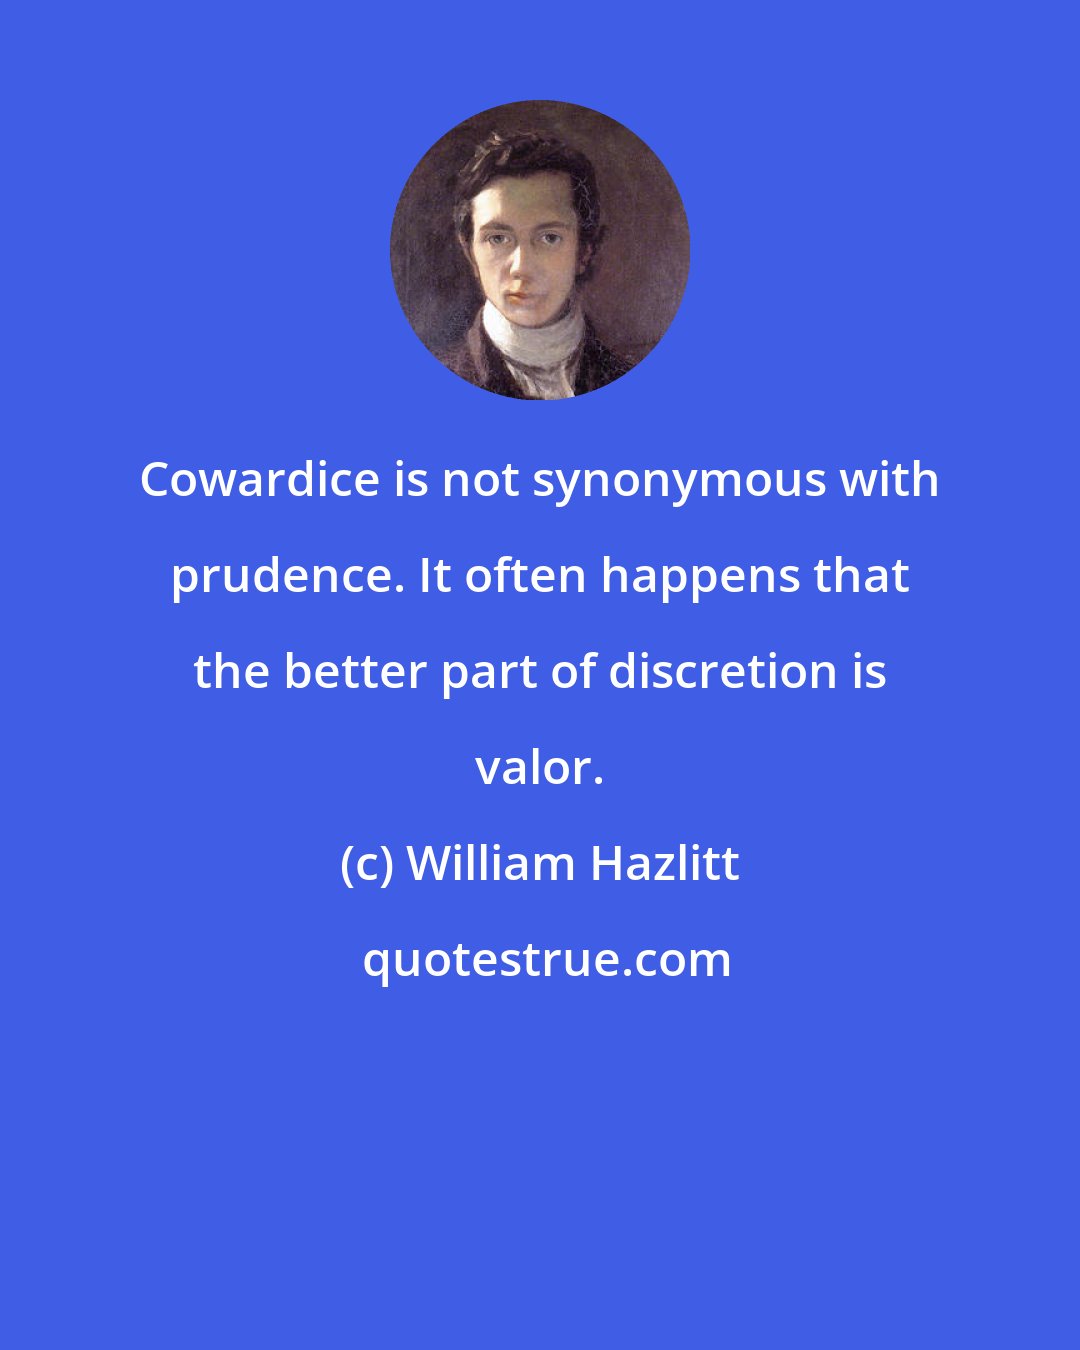 William Hazlitt: Cowardice is not synonymous with prudence. It often happens that the better part of discretion is valor.